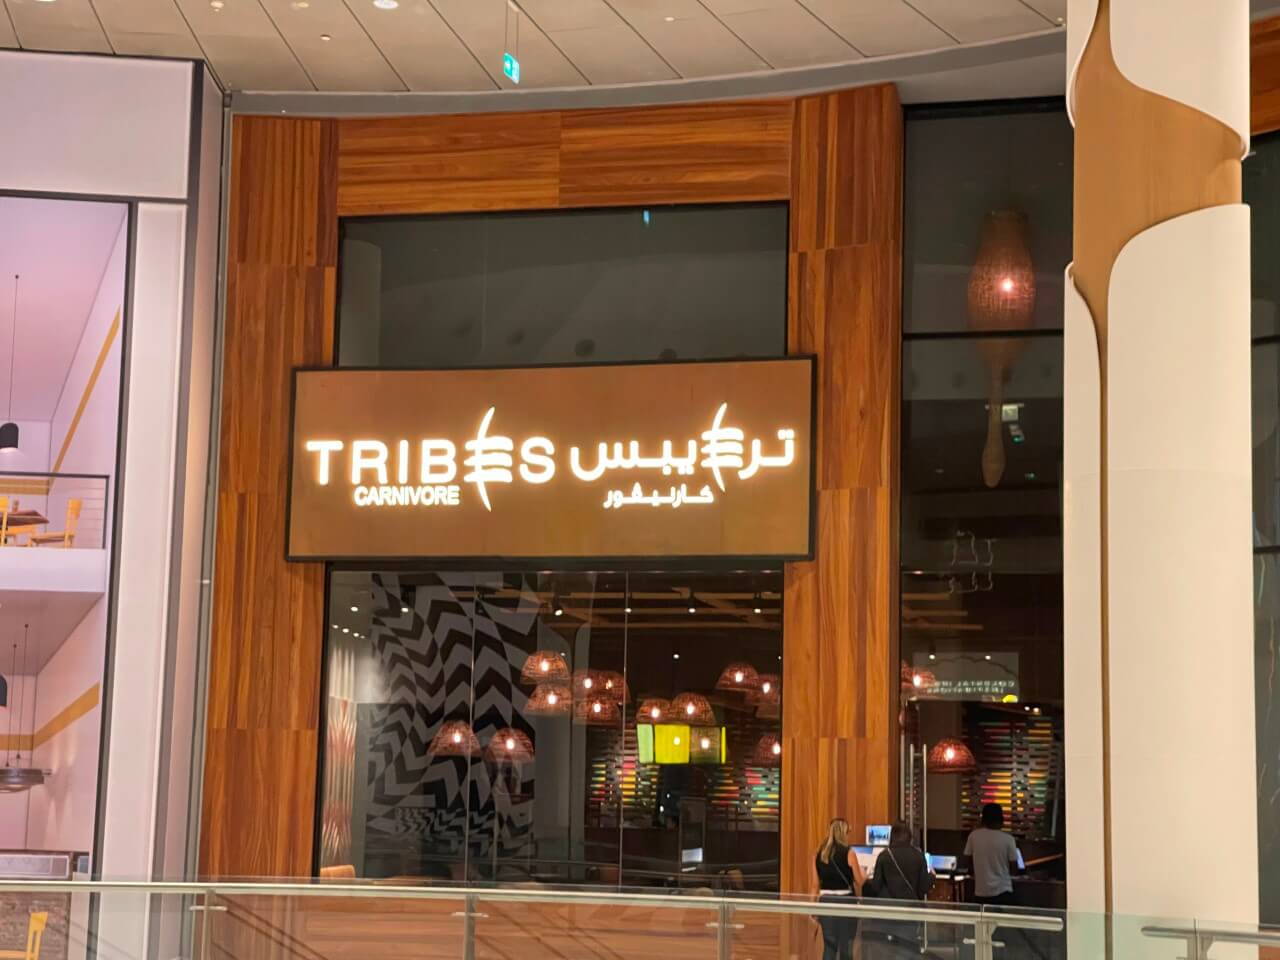 Le restaurant Tribes